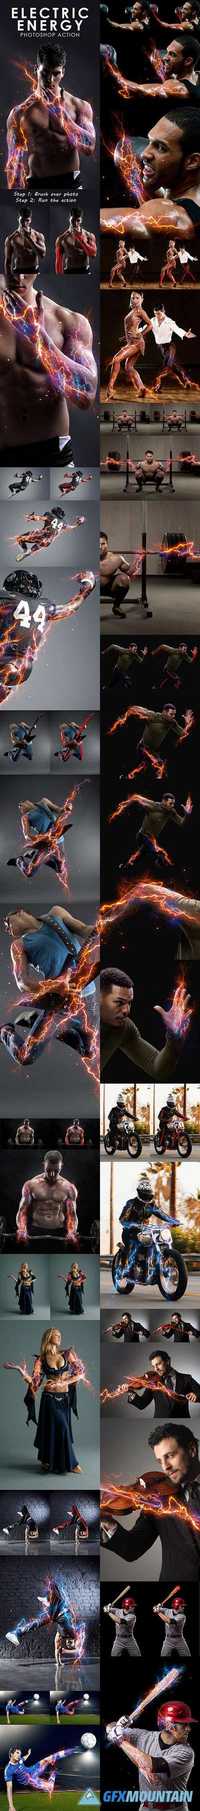 GraphicRiver - Electric Energy Photoshop Action 16607820